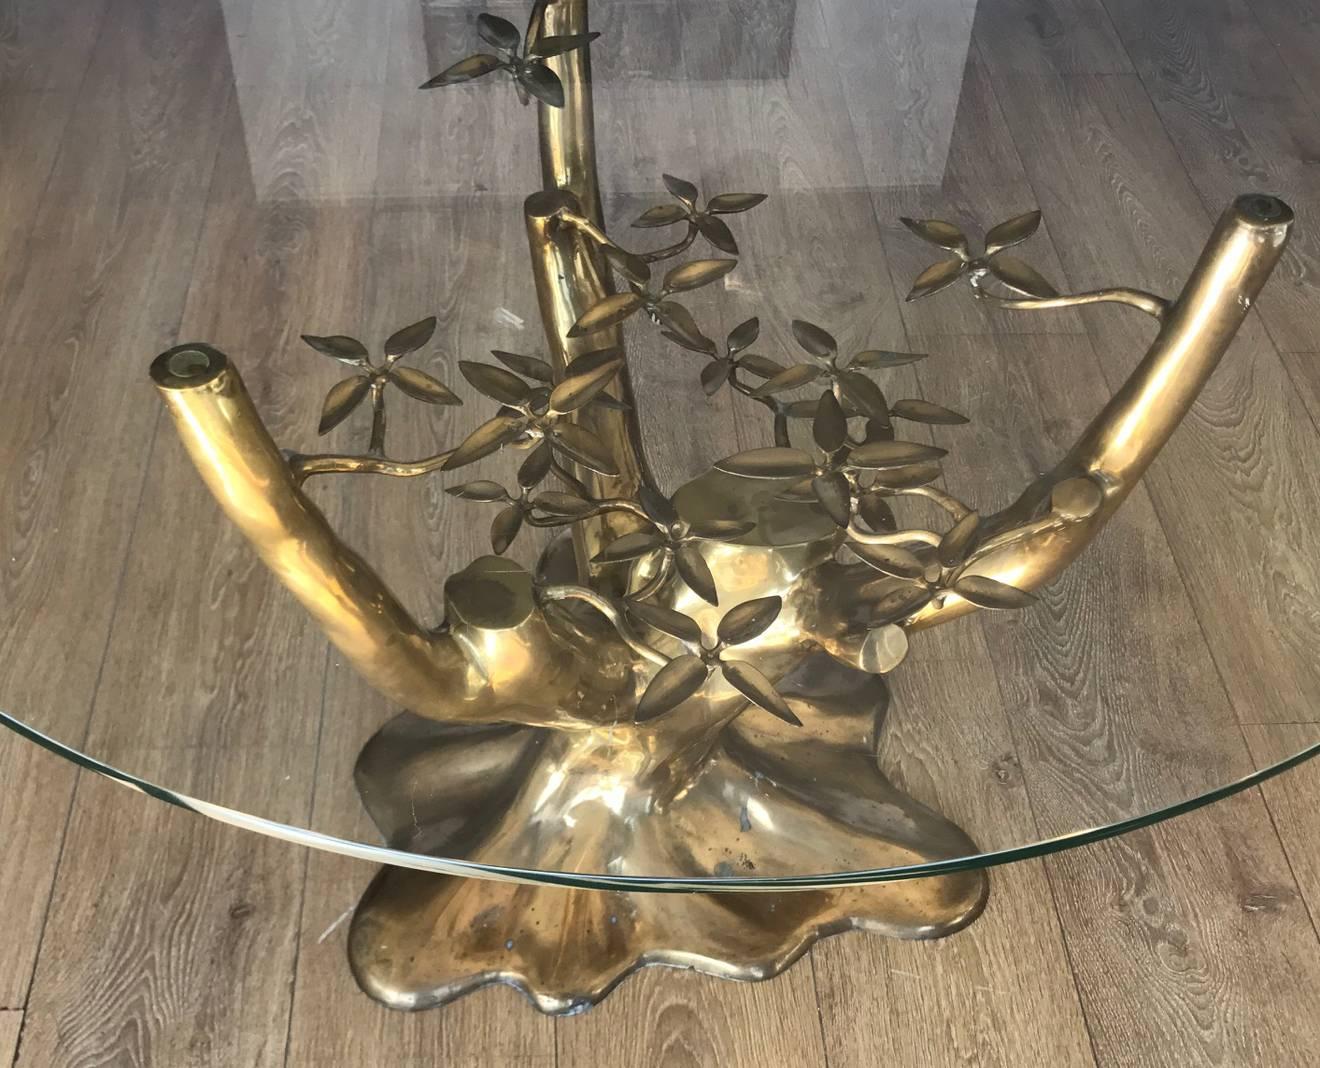 Brass tree form centre table attributed to Willy Daro. Great original patina.